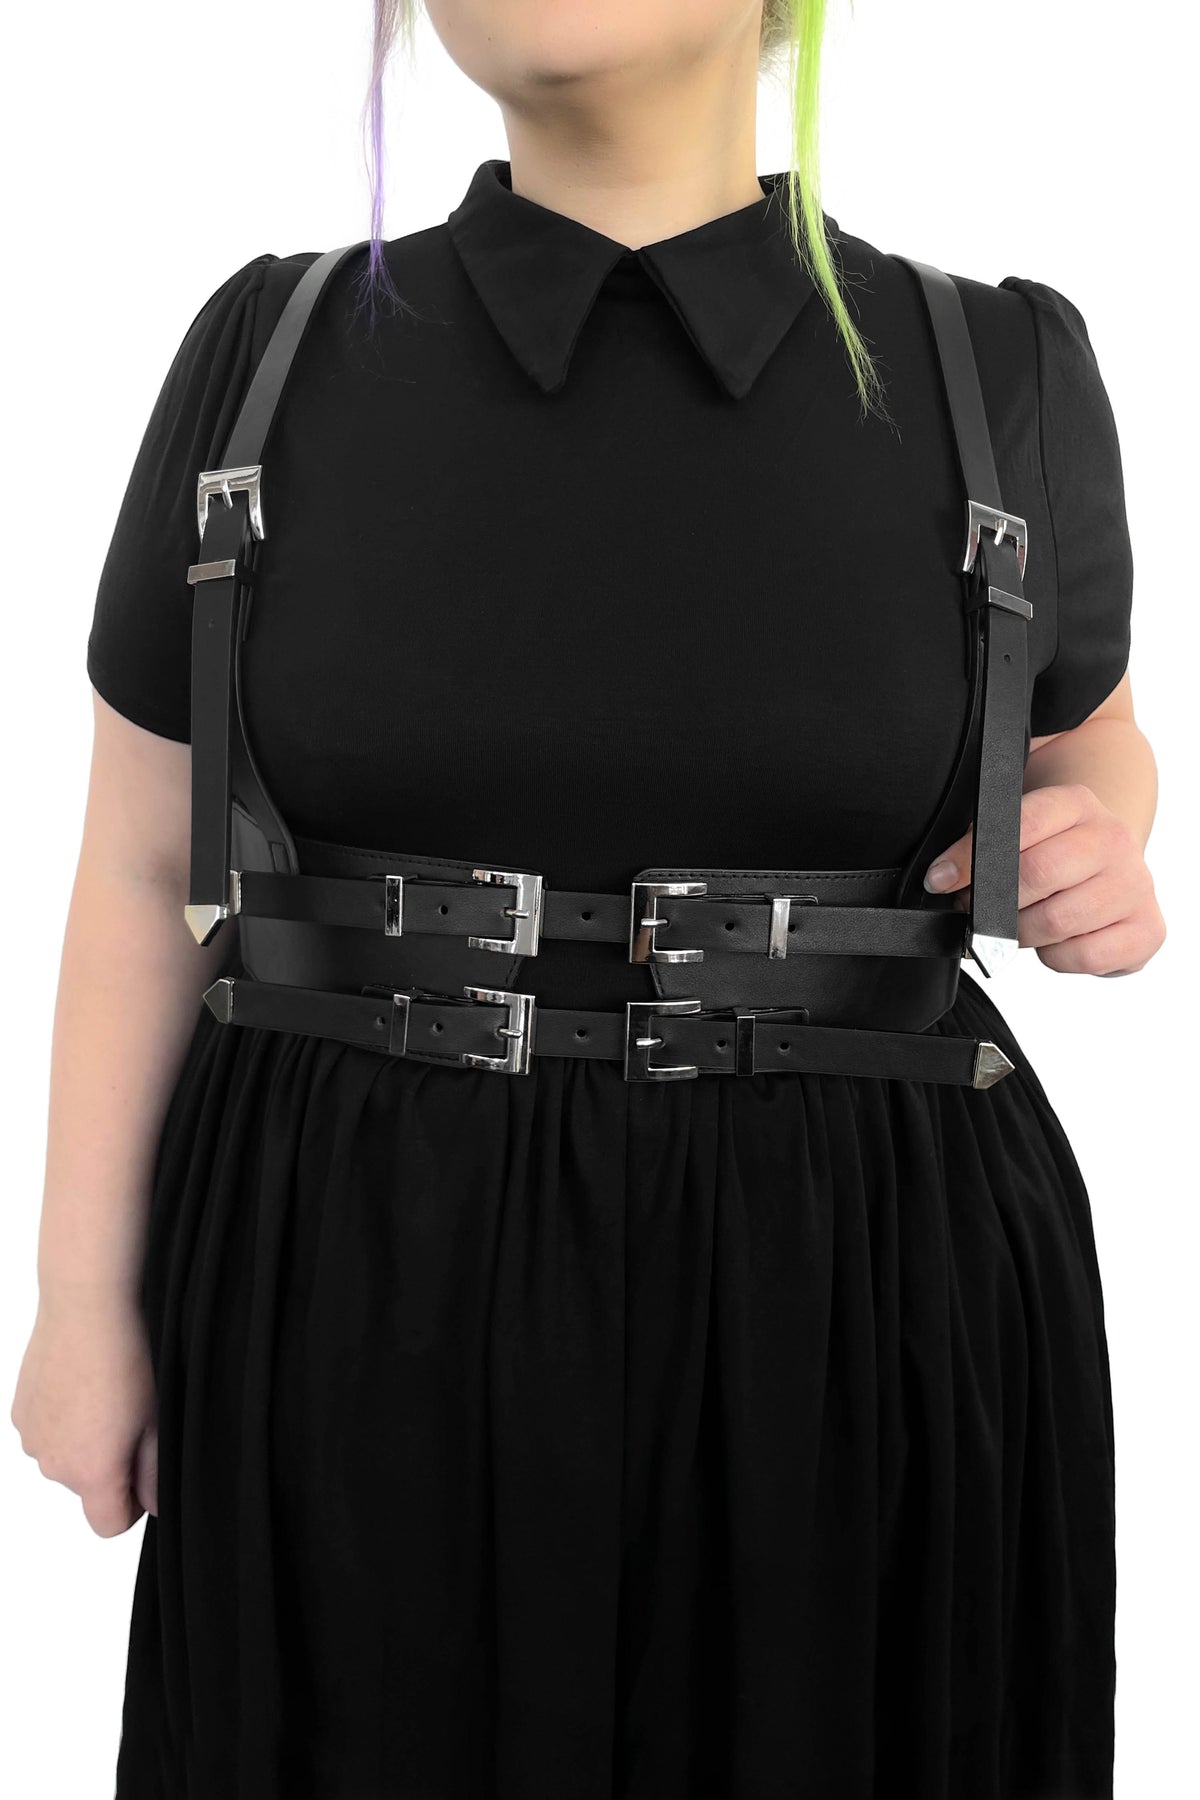 harness belt with elastic back, adjustable front and arm straps.